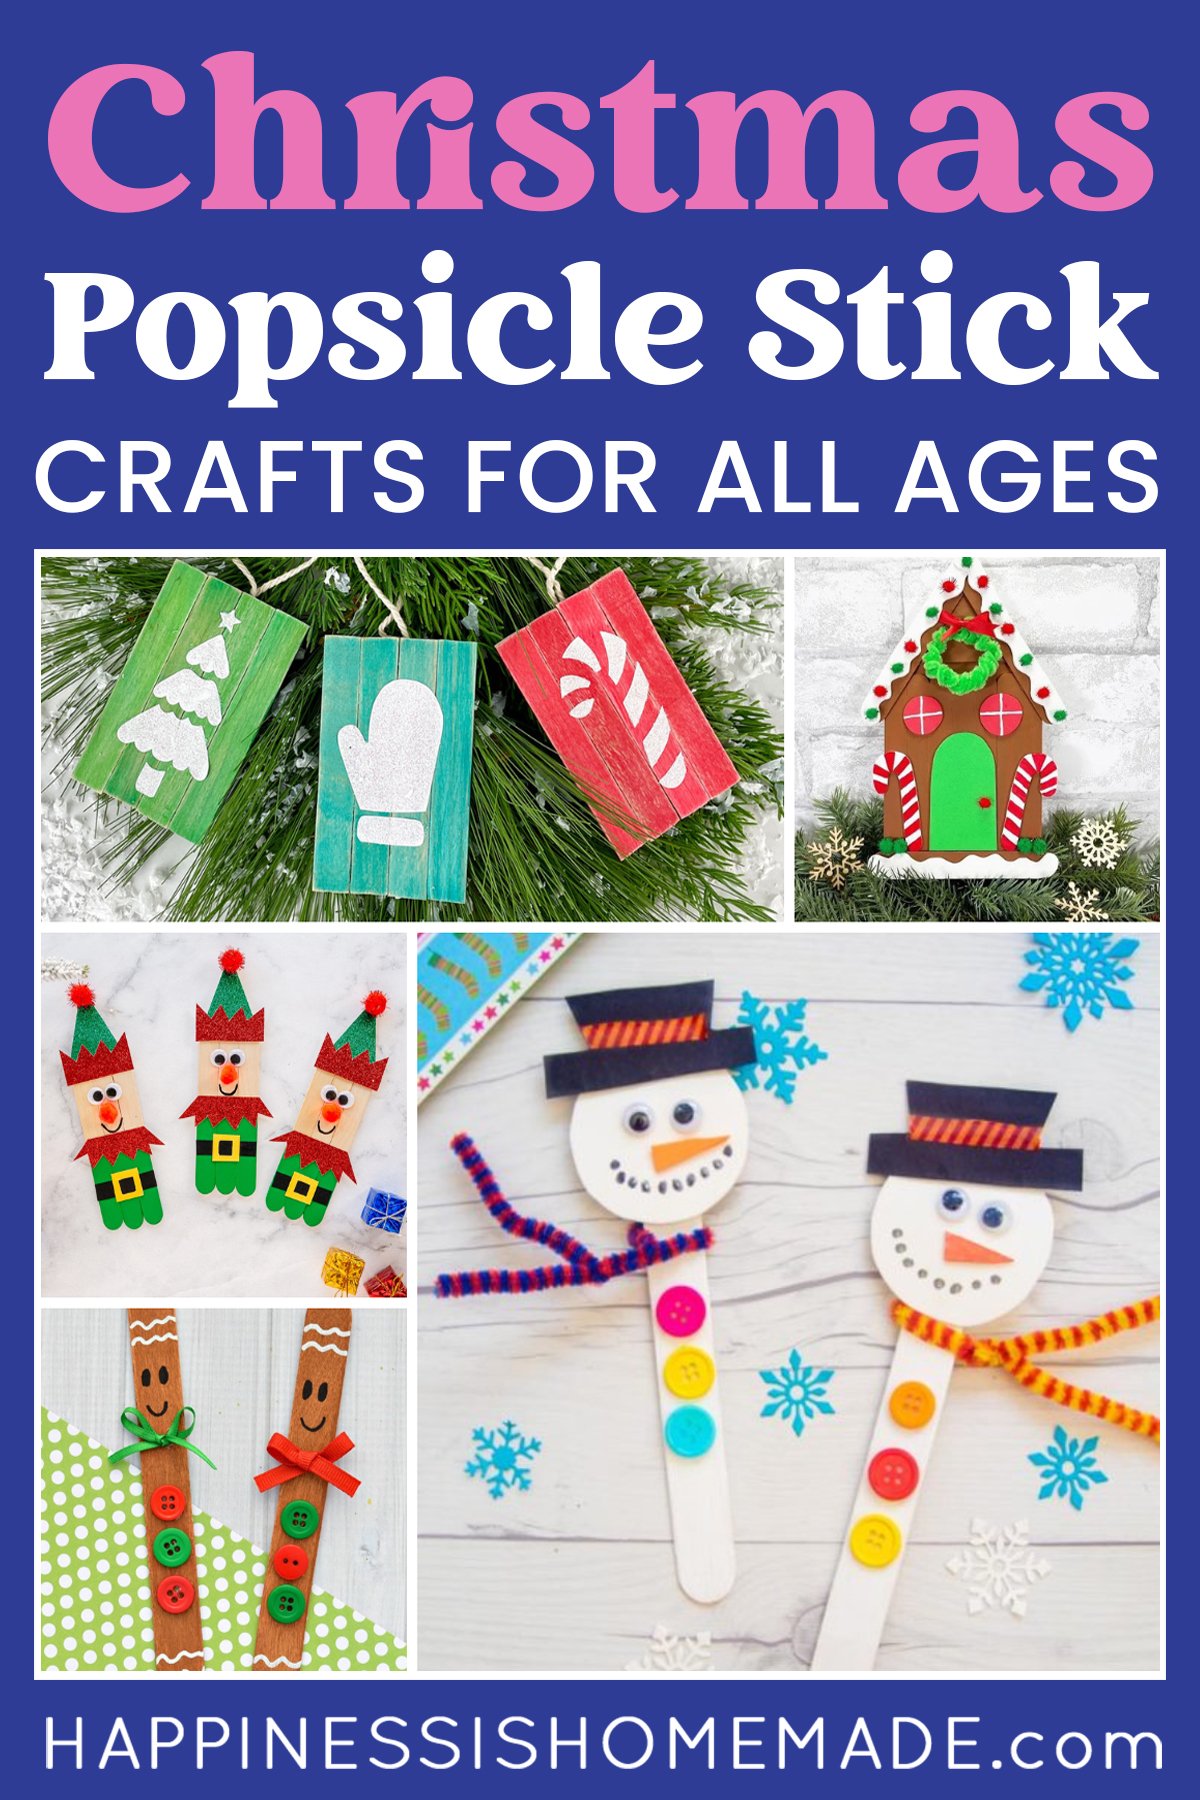 "50+ Christmas Popsicle Stick Crafts for All Ages" graphic with collage of craft stick project ideas